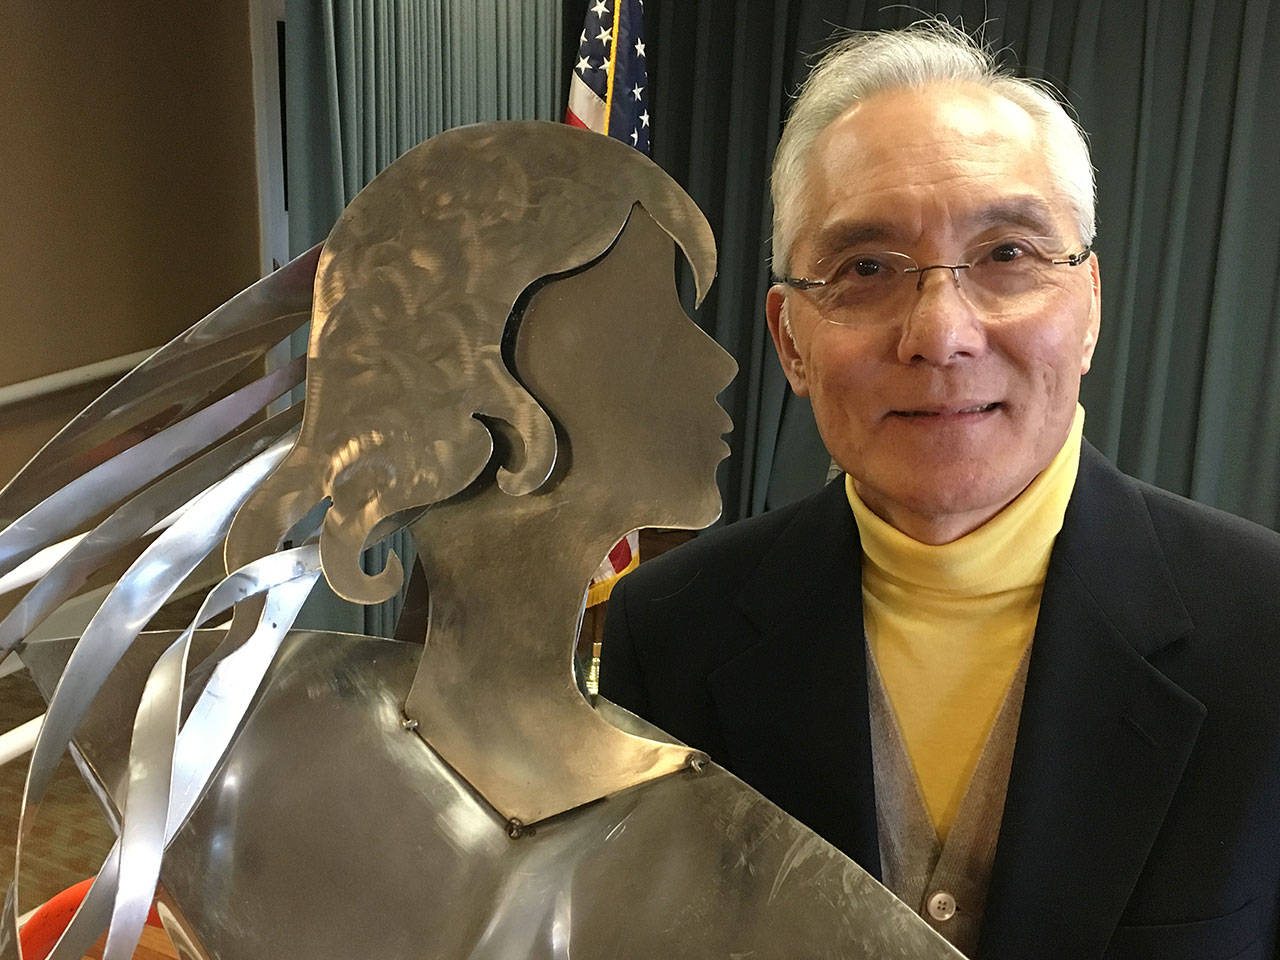 Dr. Kevin Au donated this sculpture of a mermaid to Covenant Shores. Photo courtesy of Greg Asimakoupoulos